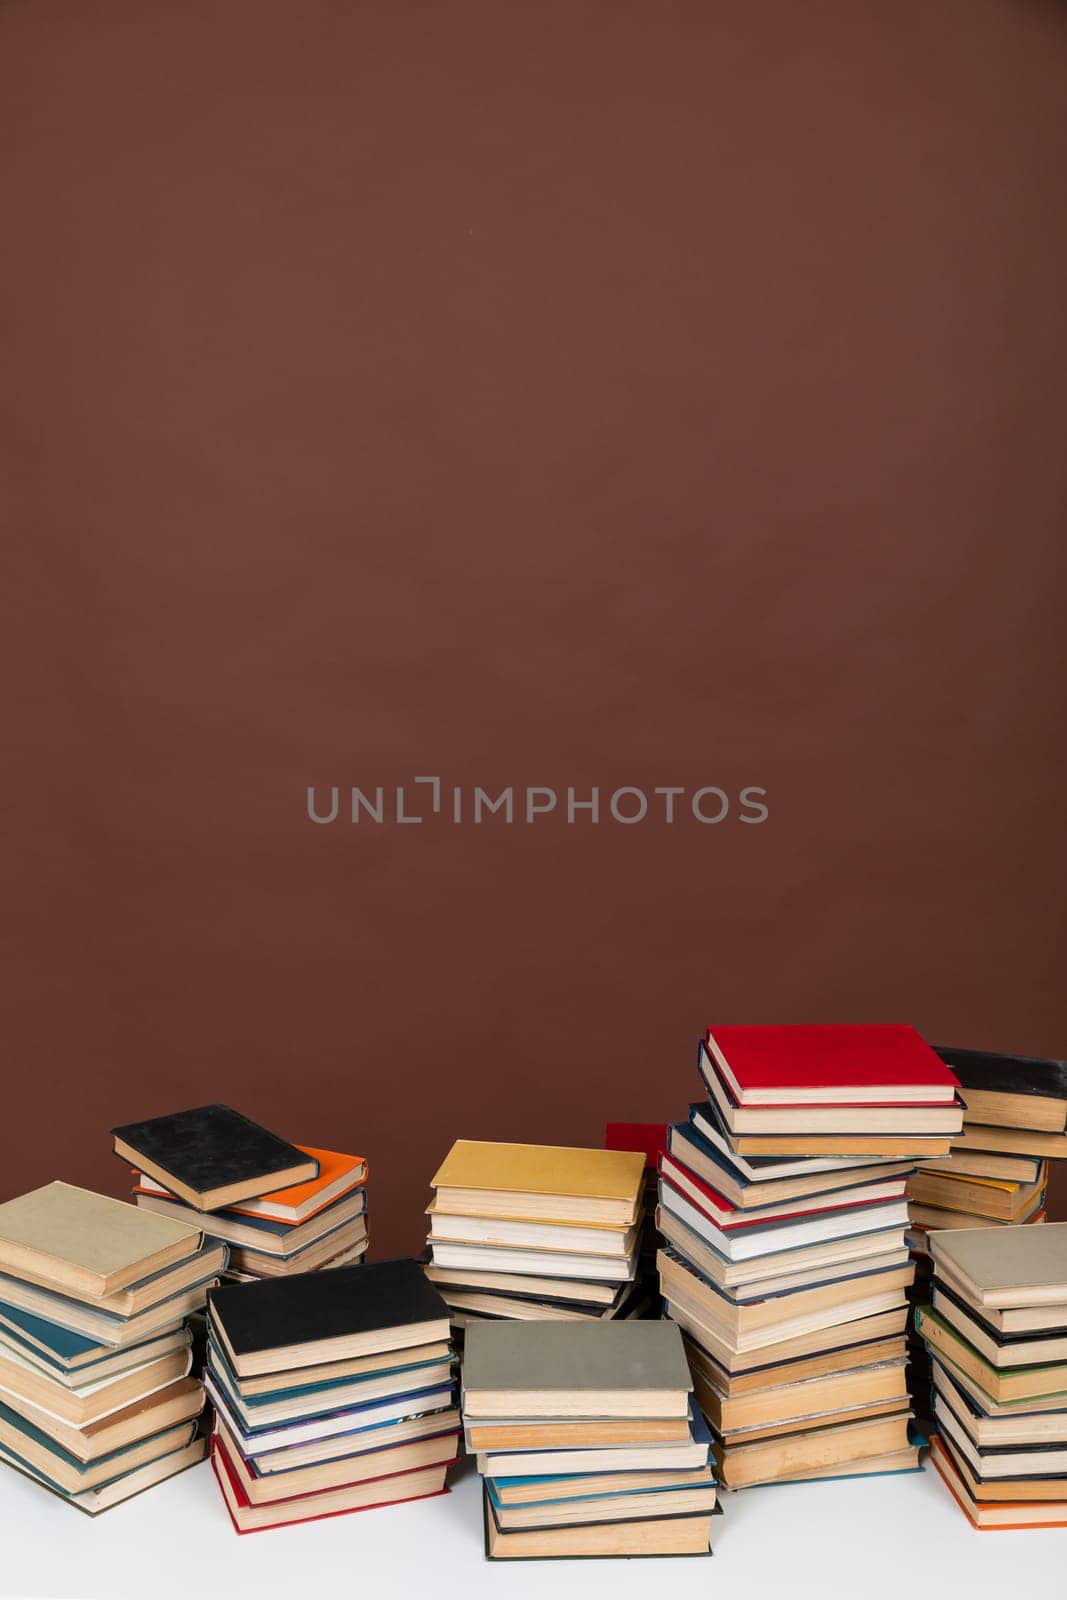 education science learning library stack of books on brown background by Simakov